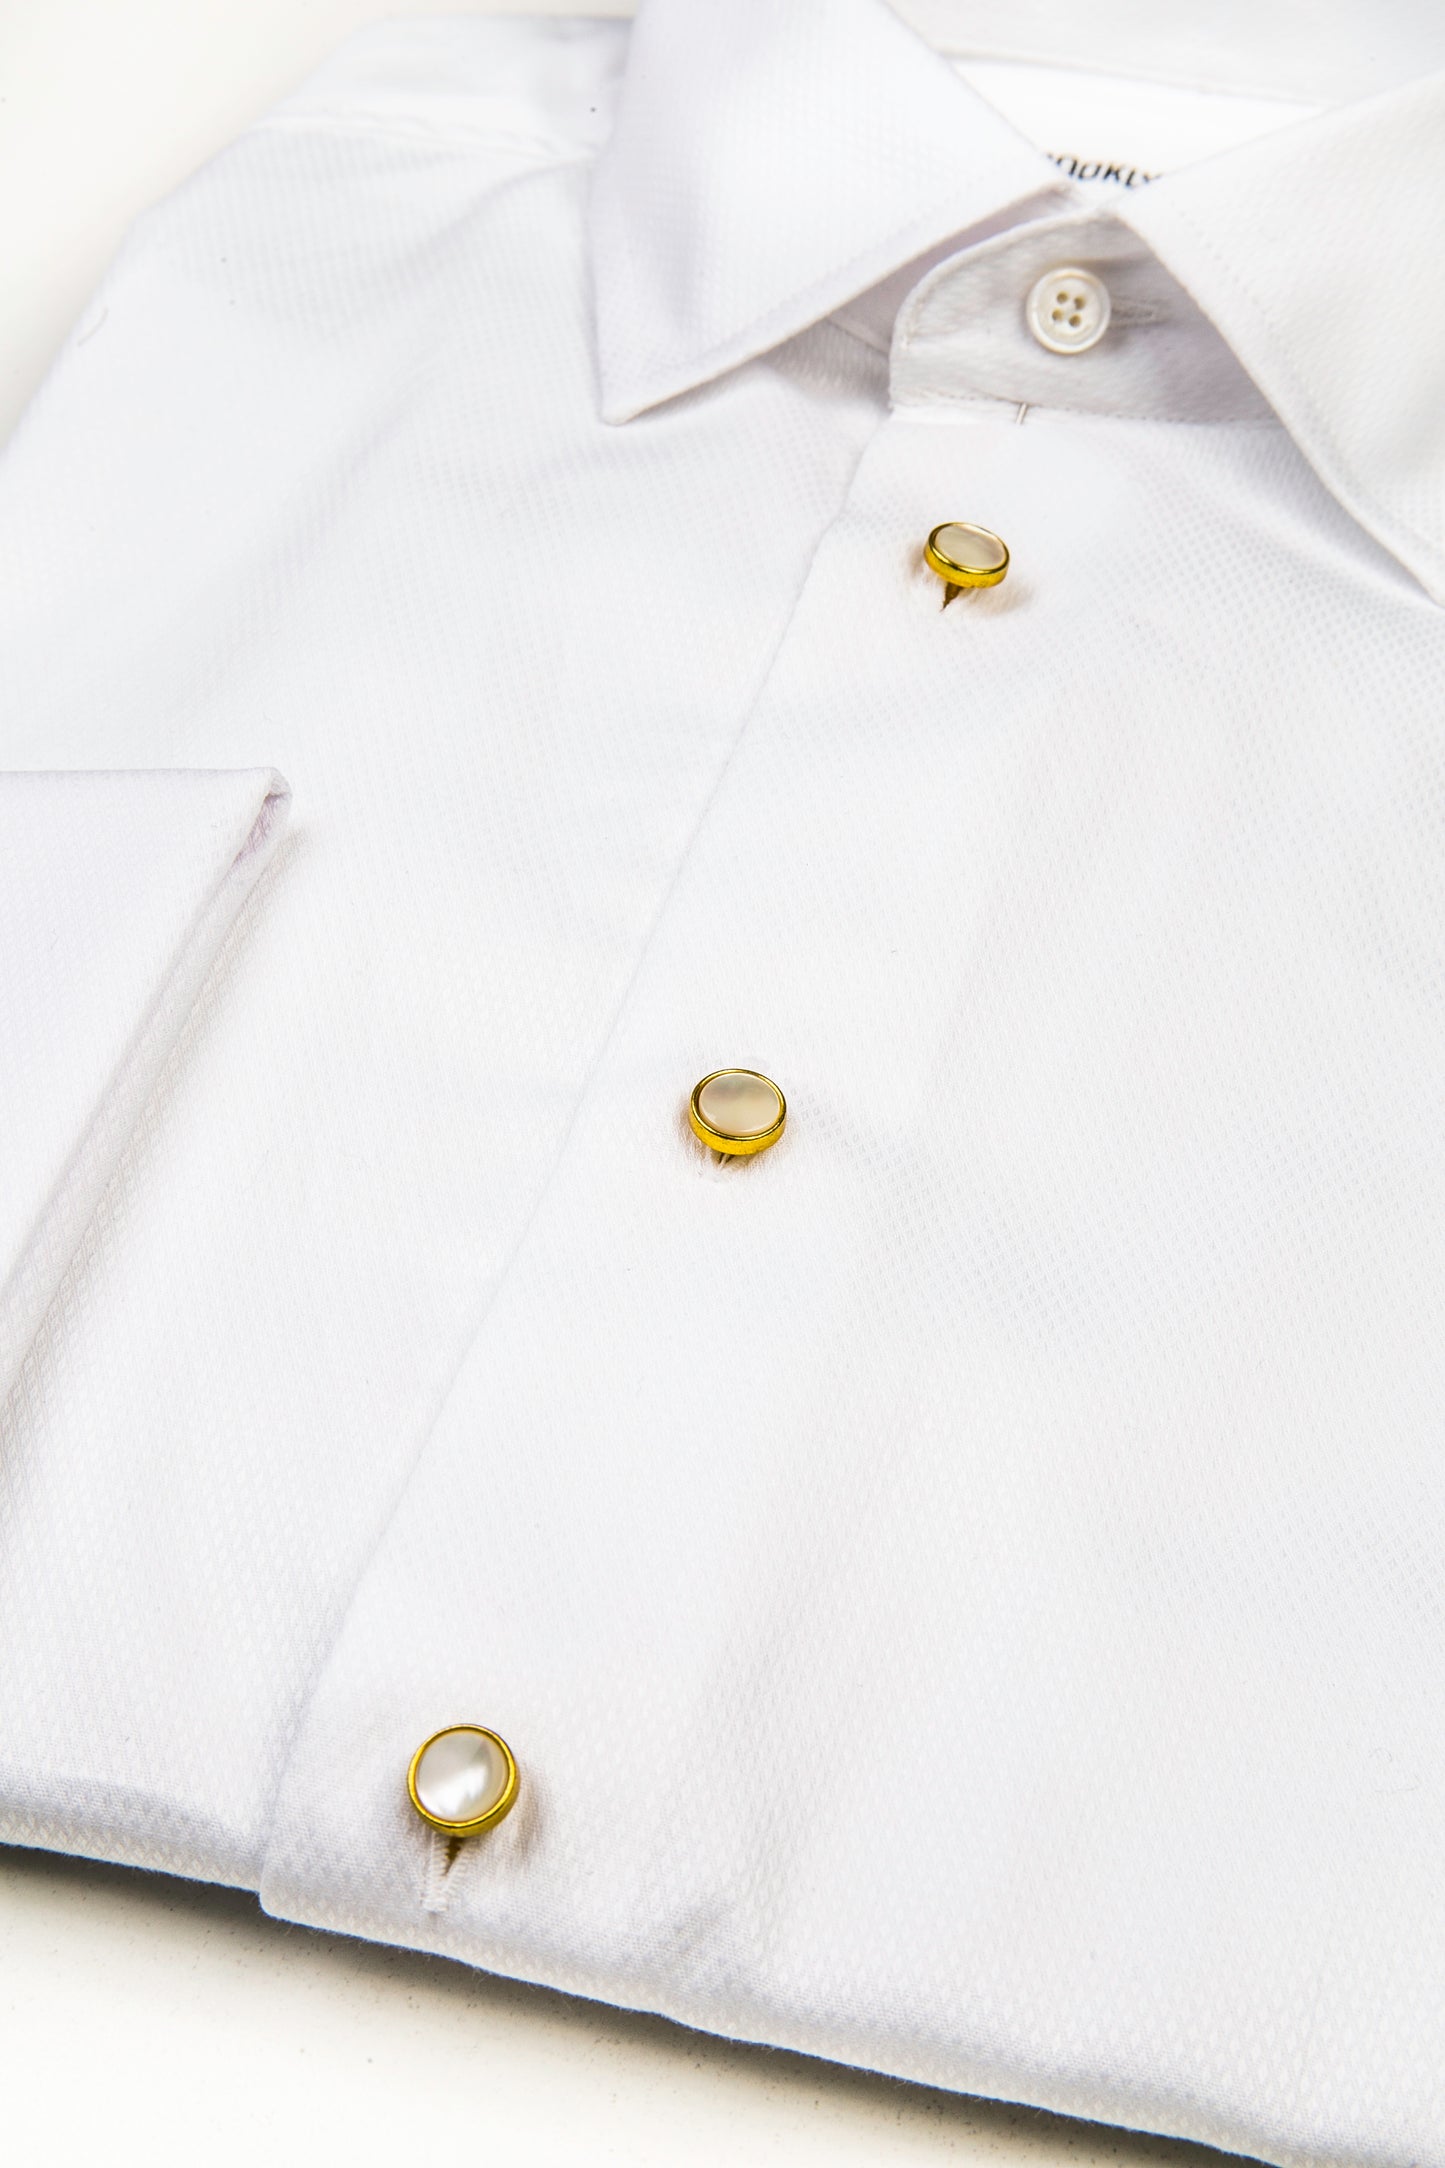 Detail of Mother of Pearl & Brass Dress Studs in a tuxedo shirt